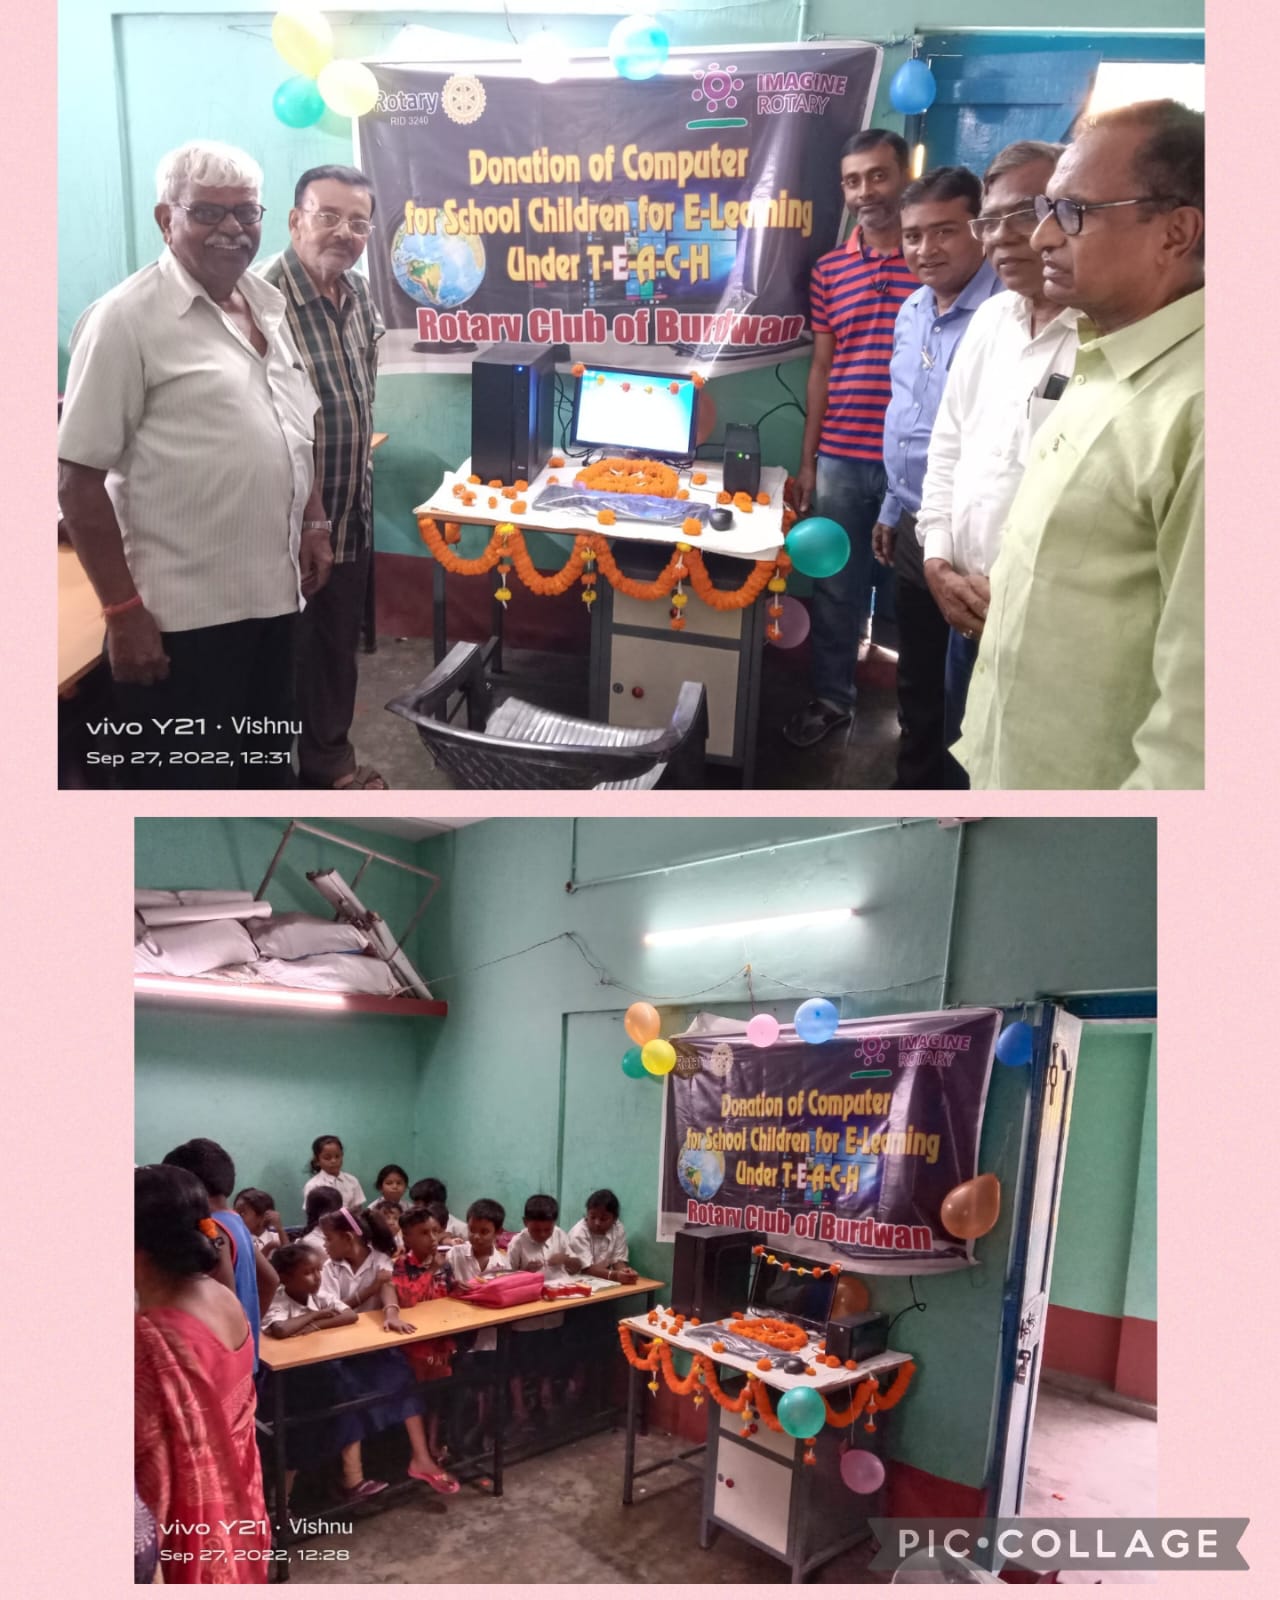 Donation of Computer